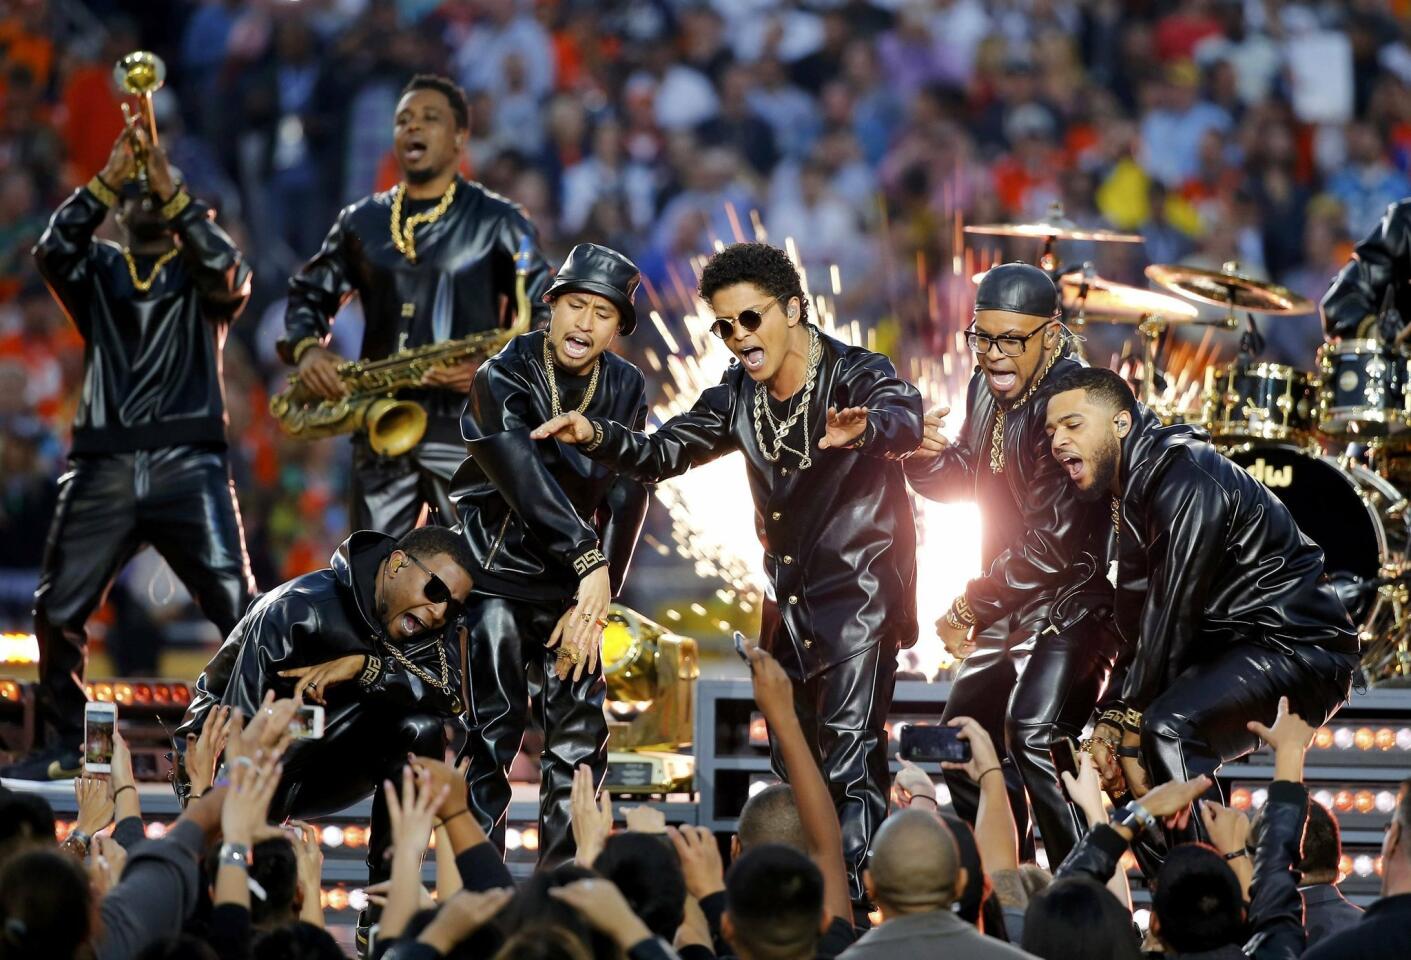 Bruno Mars performs during half-time at the NFL's Super Bowl 50 football game between the Carolina Panthers and the Denver Broncos in Santa Clara, California February 7, 2016. REUTERS/Mike Blake